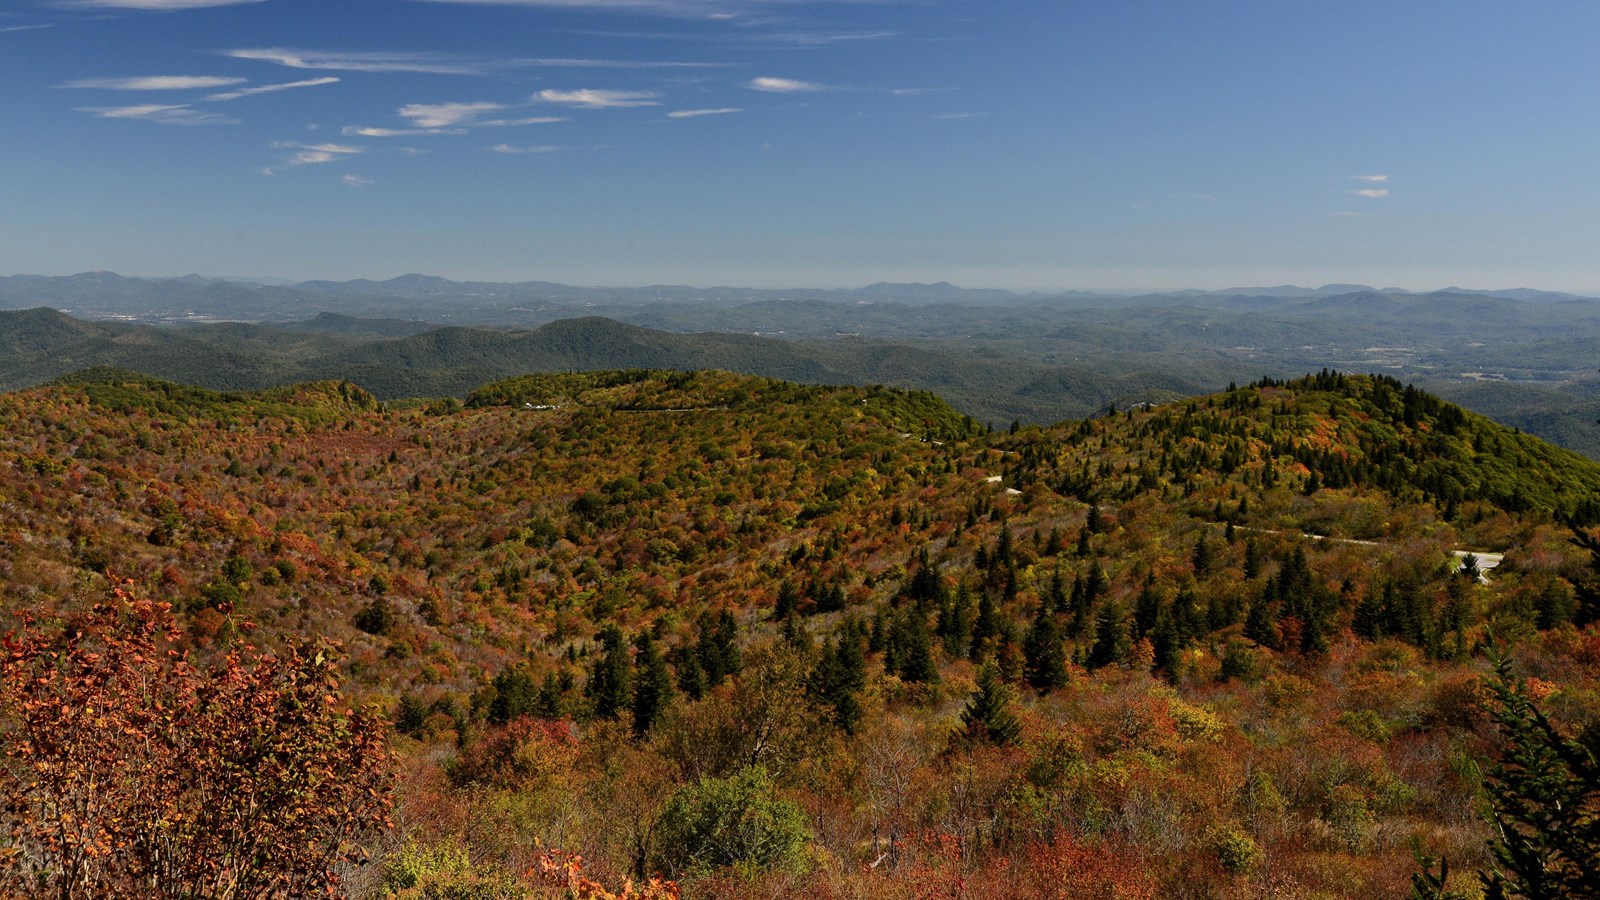 View of Graveyard Fields Valley with fall colors and layered mountains in the background